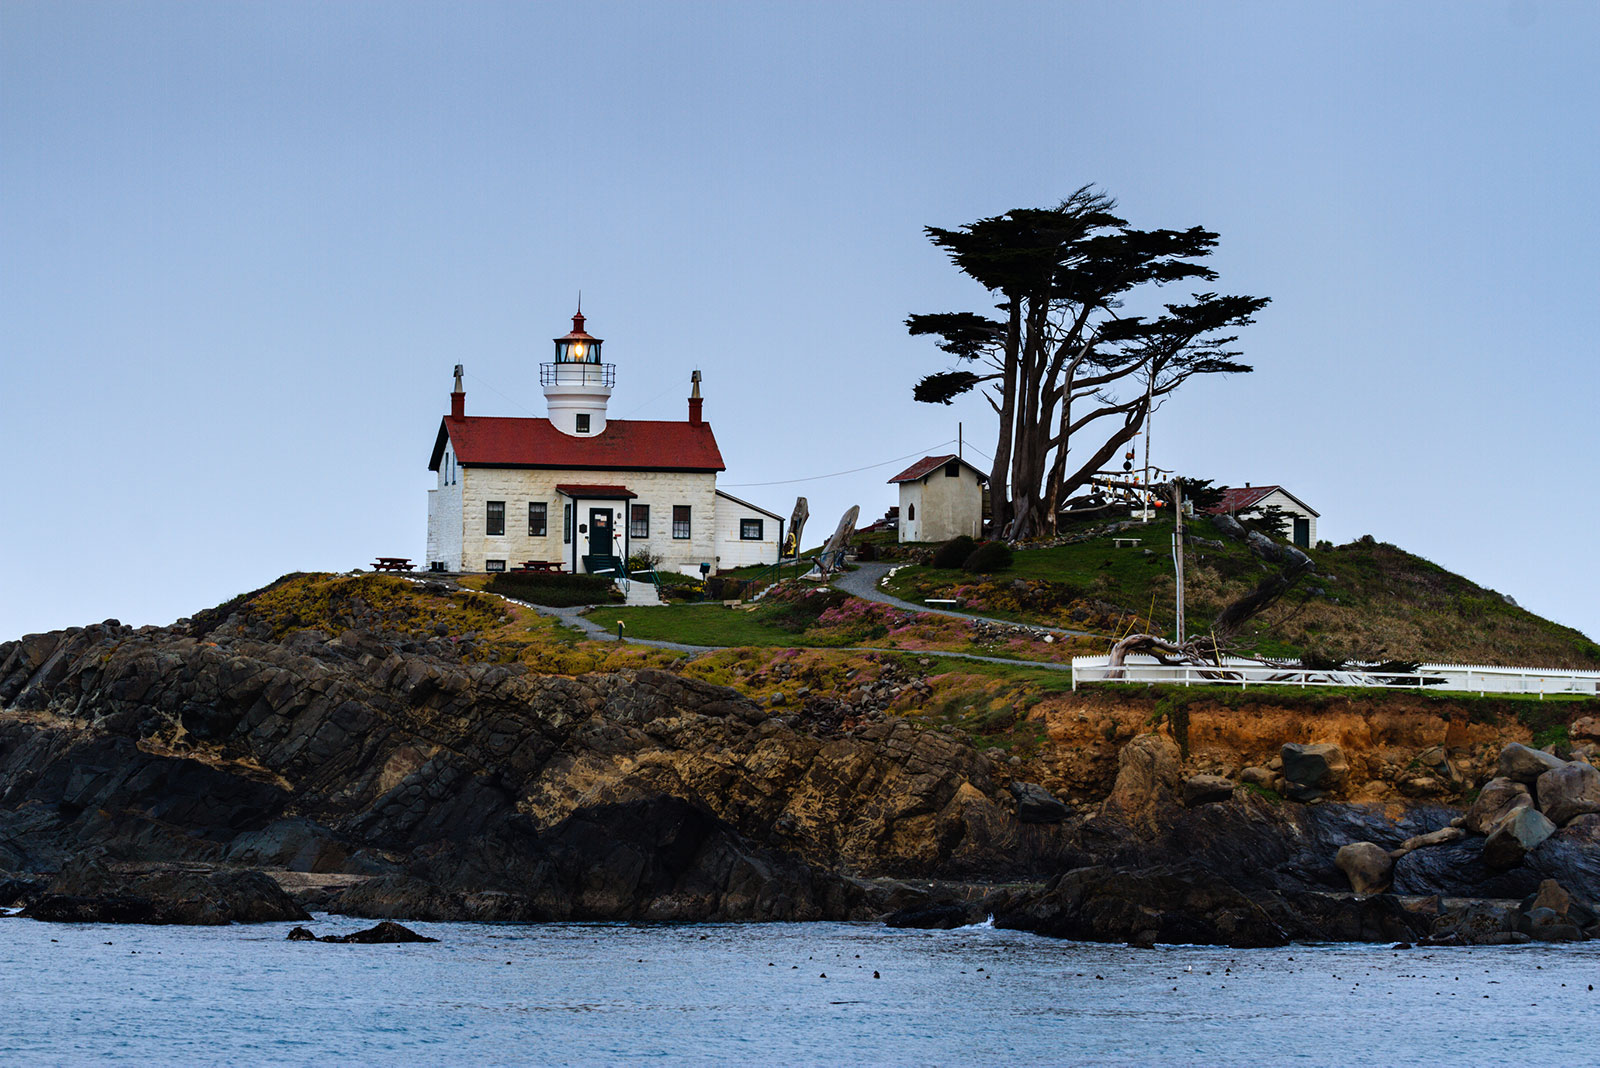 Battery Point lighthouse on a small island at Crescent City, California